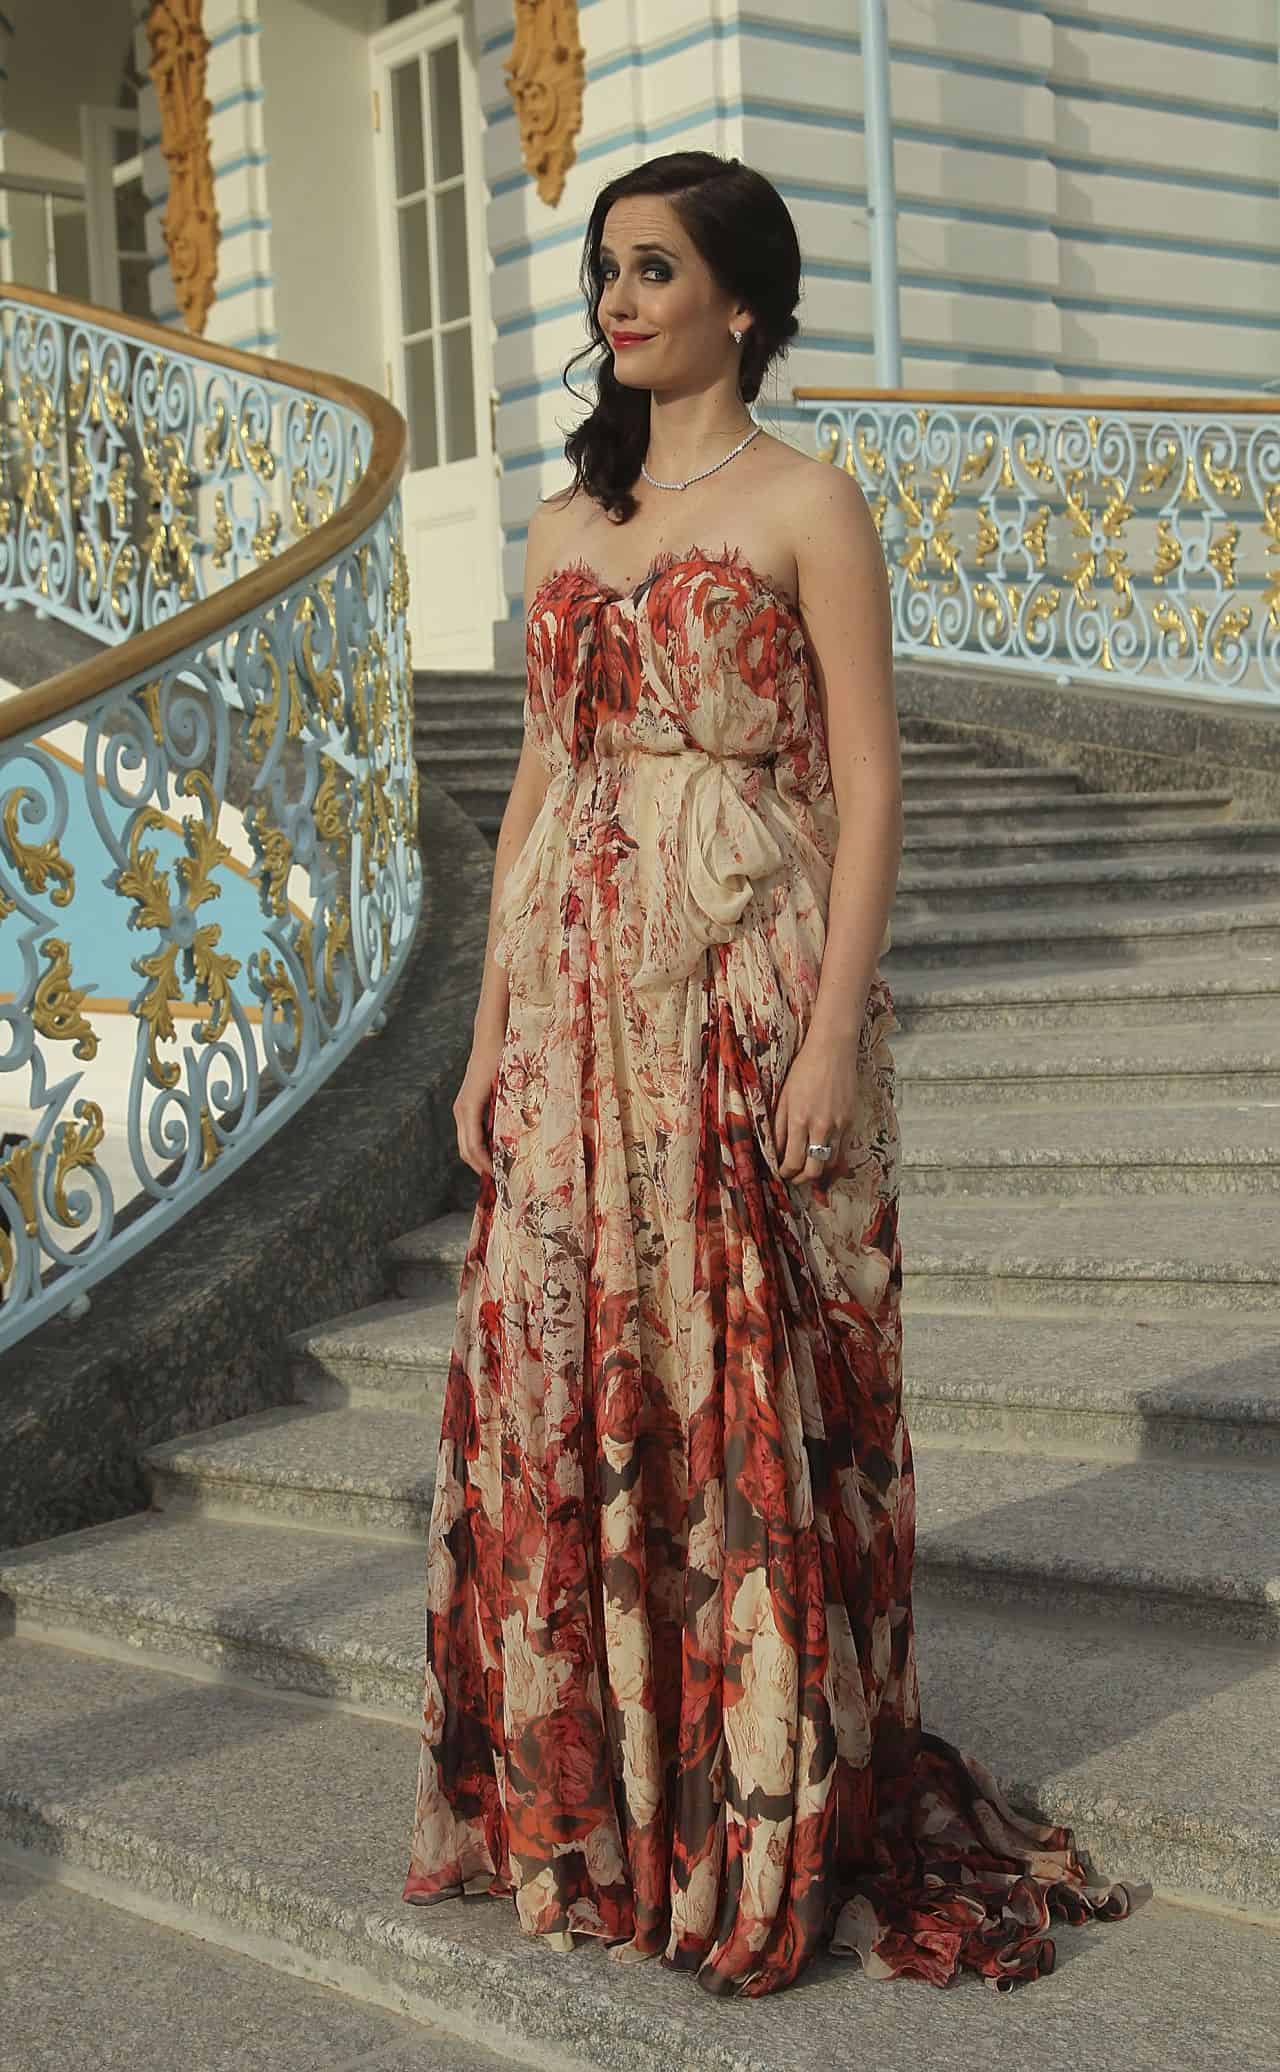 Eva Green Captivates in Delicate Floral Dress at Montblanc Event